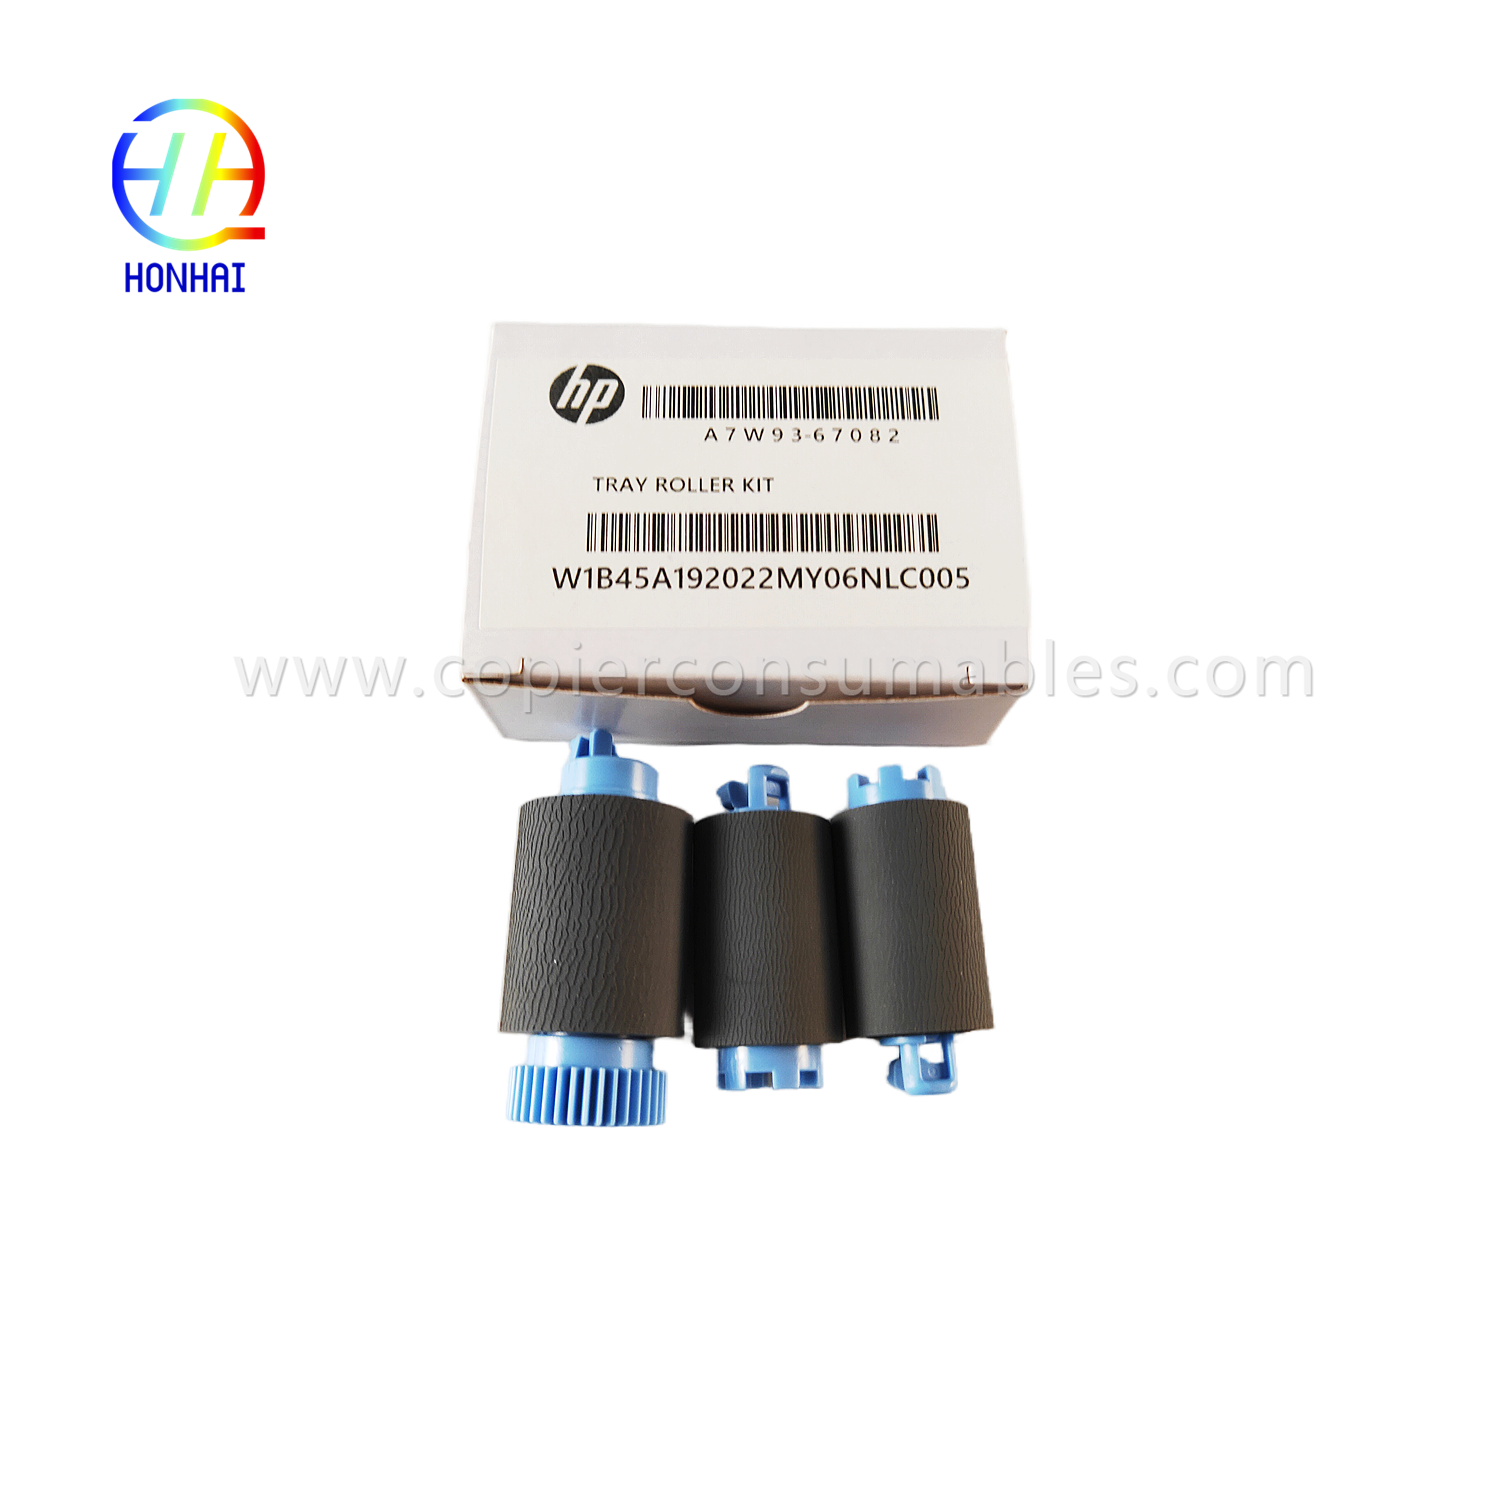 https://www.copierconsumables.com/tray-2-5-pickup-feed-separation-roller-set-for-hp-a7w93-67082-mfp-785f-780dn-e77650z-e77660z-e77650dn-e77660dn-p77740dn- p77750z-p77760z-p75050dn-p75050dw-product/